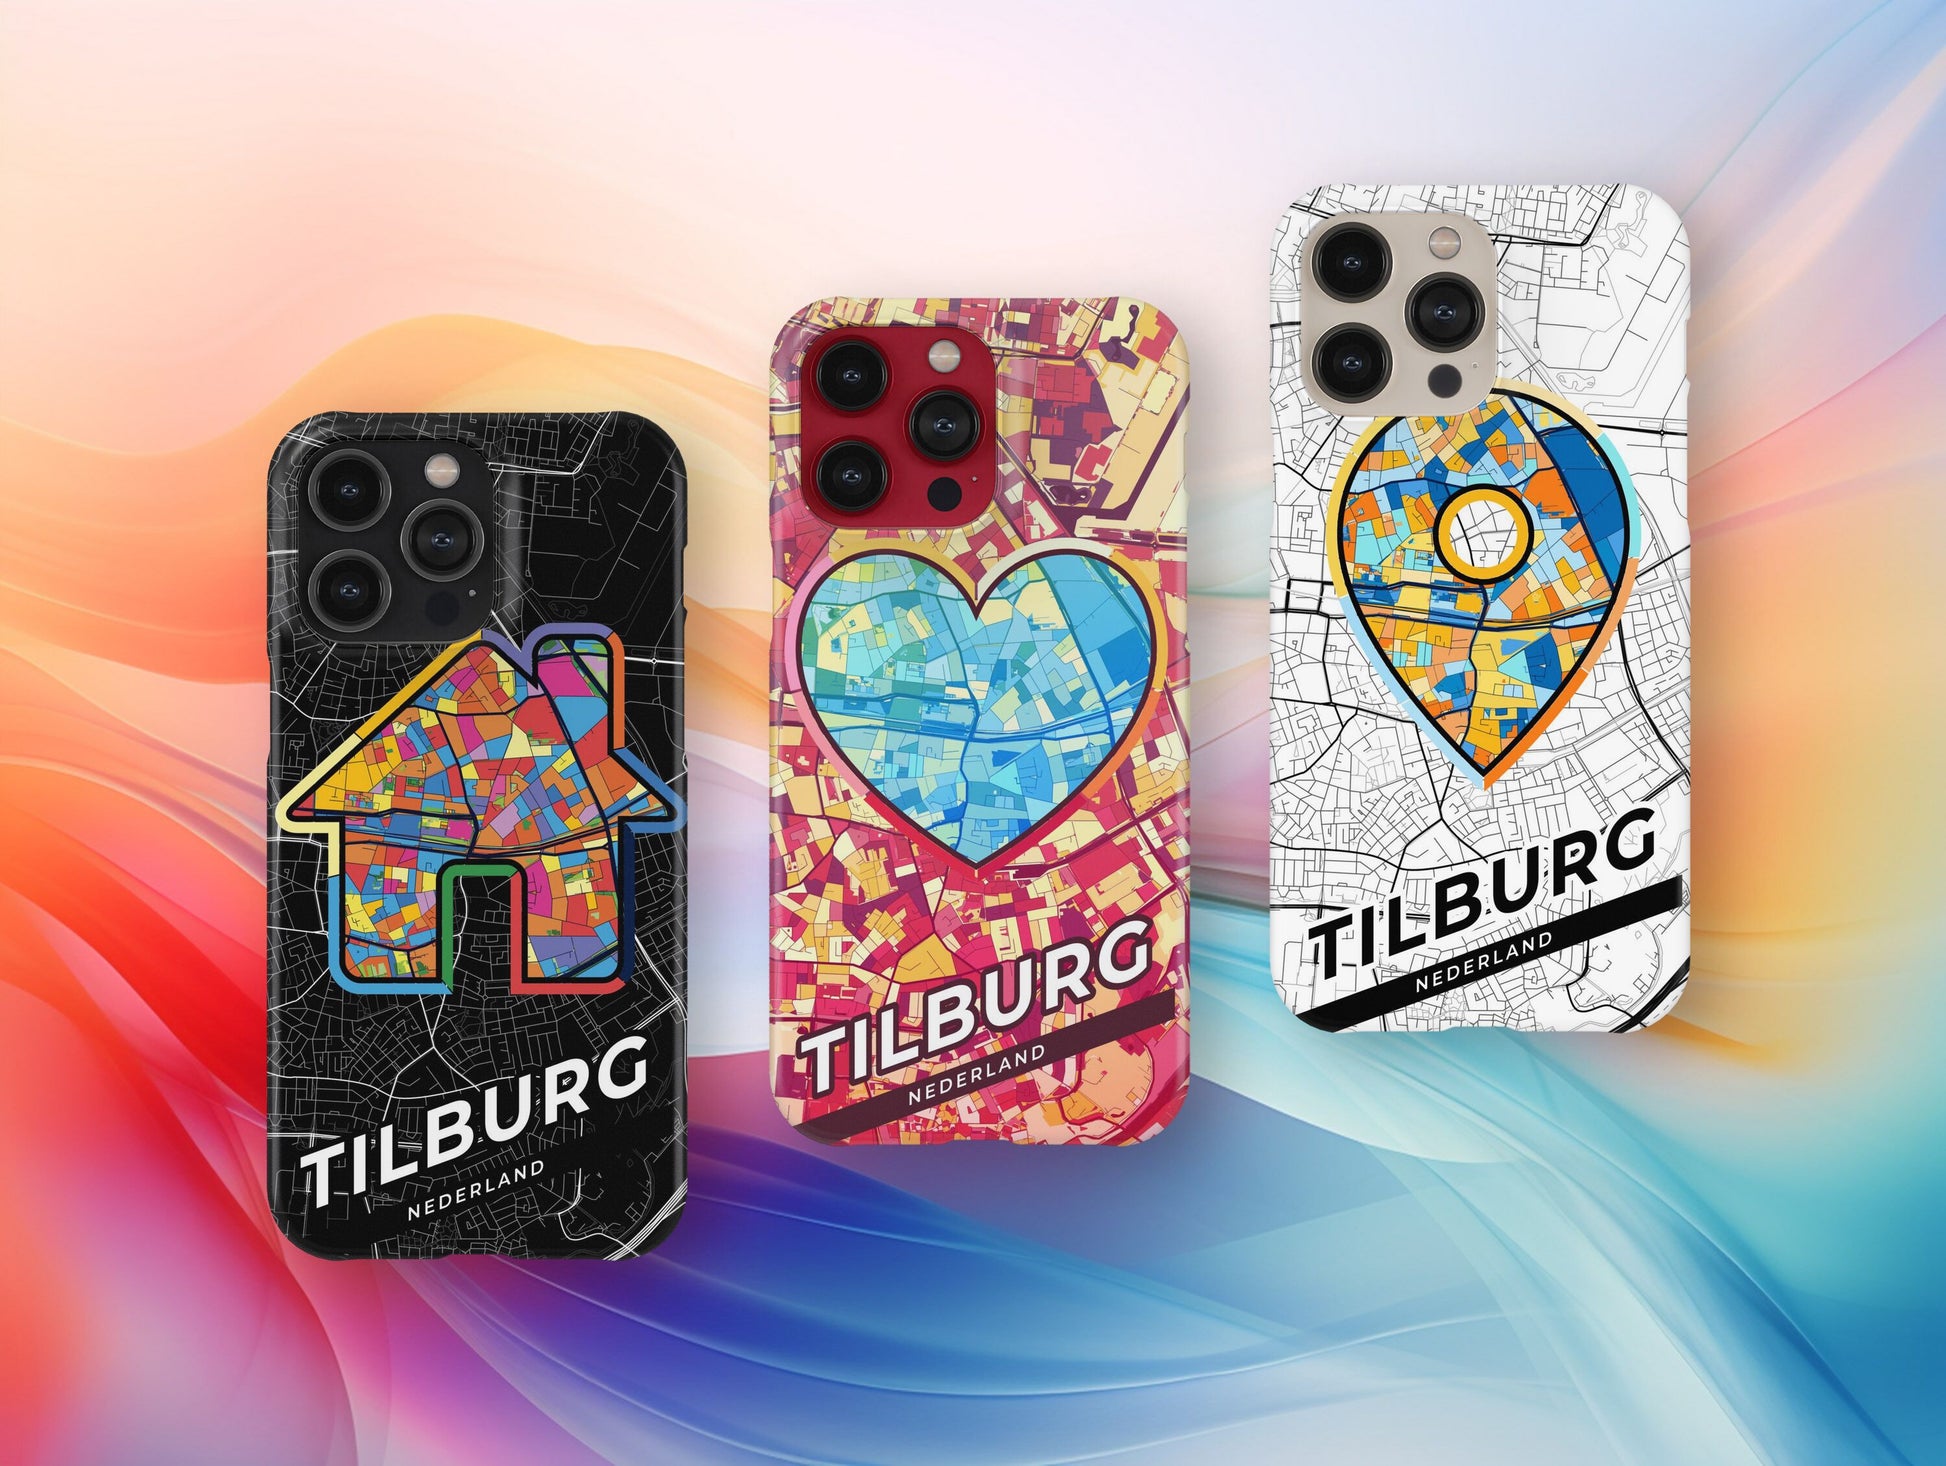 Tilburg Netherlands slim phone case with colorful icon